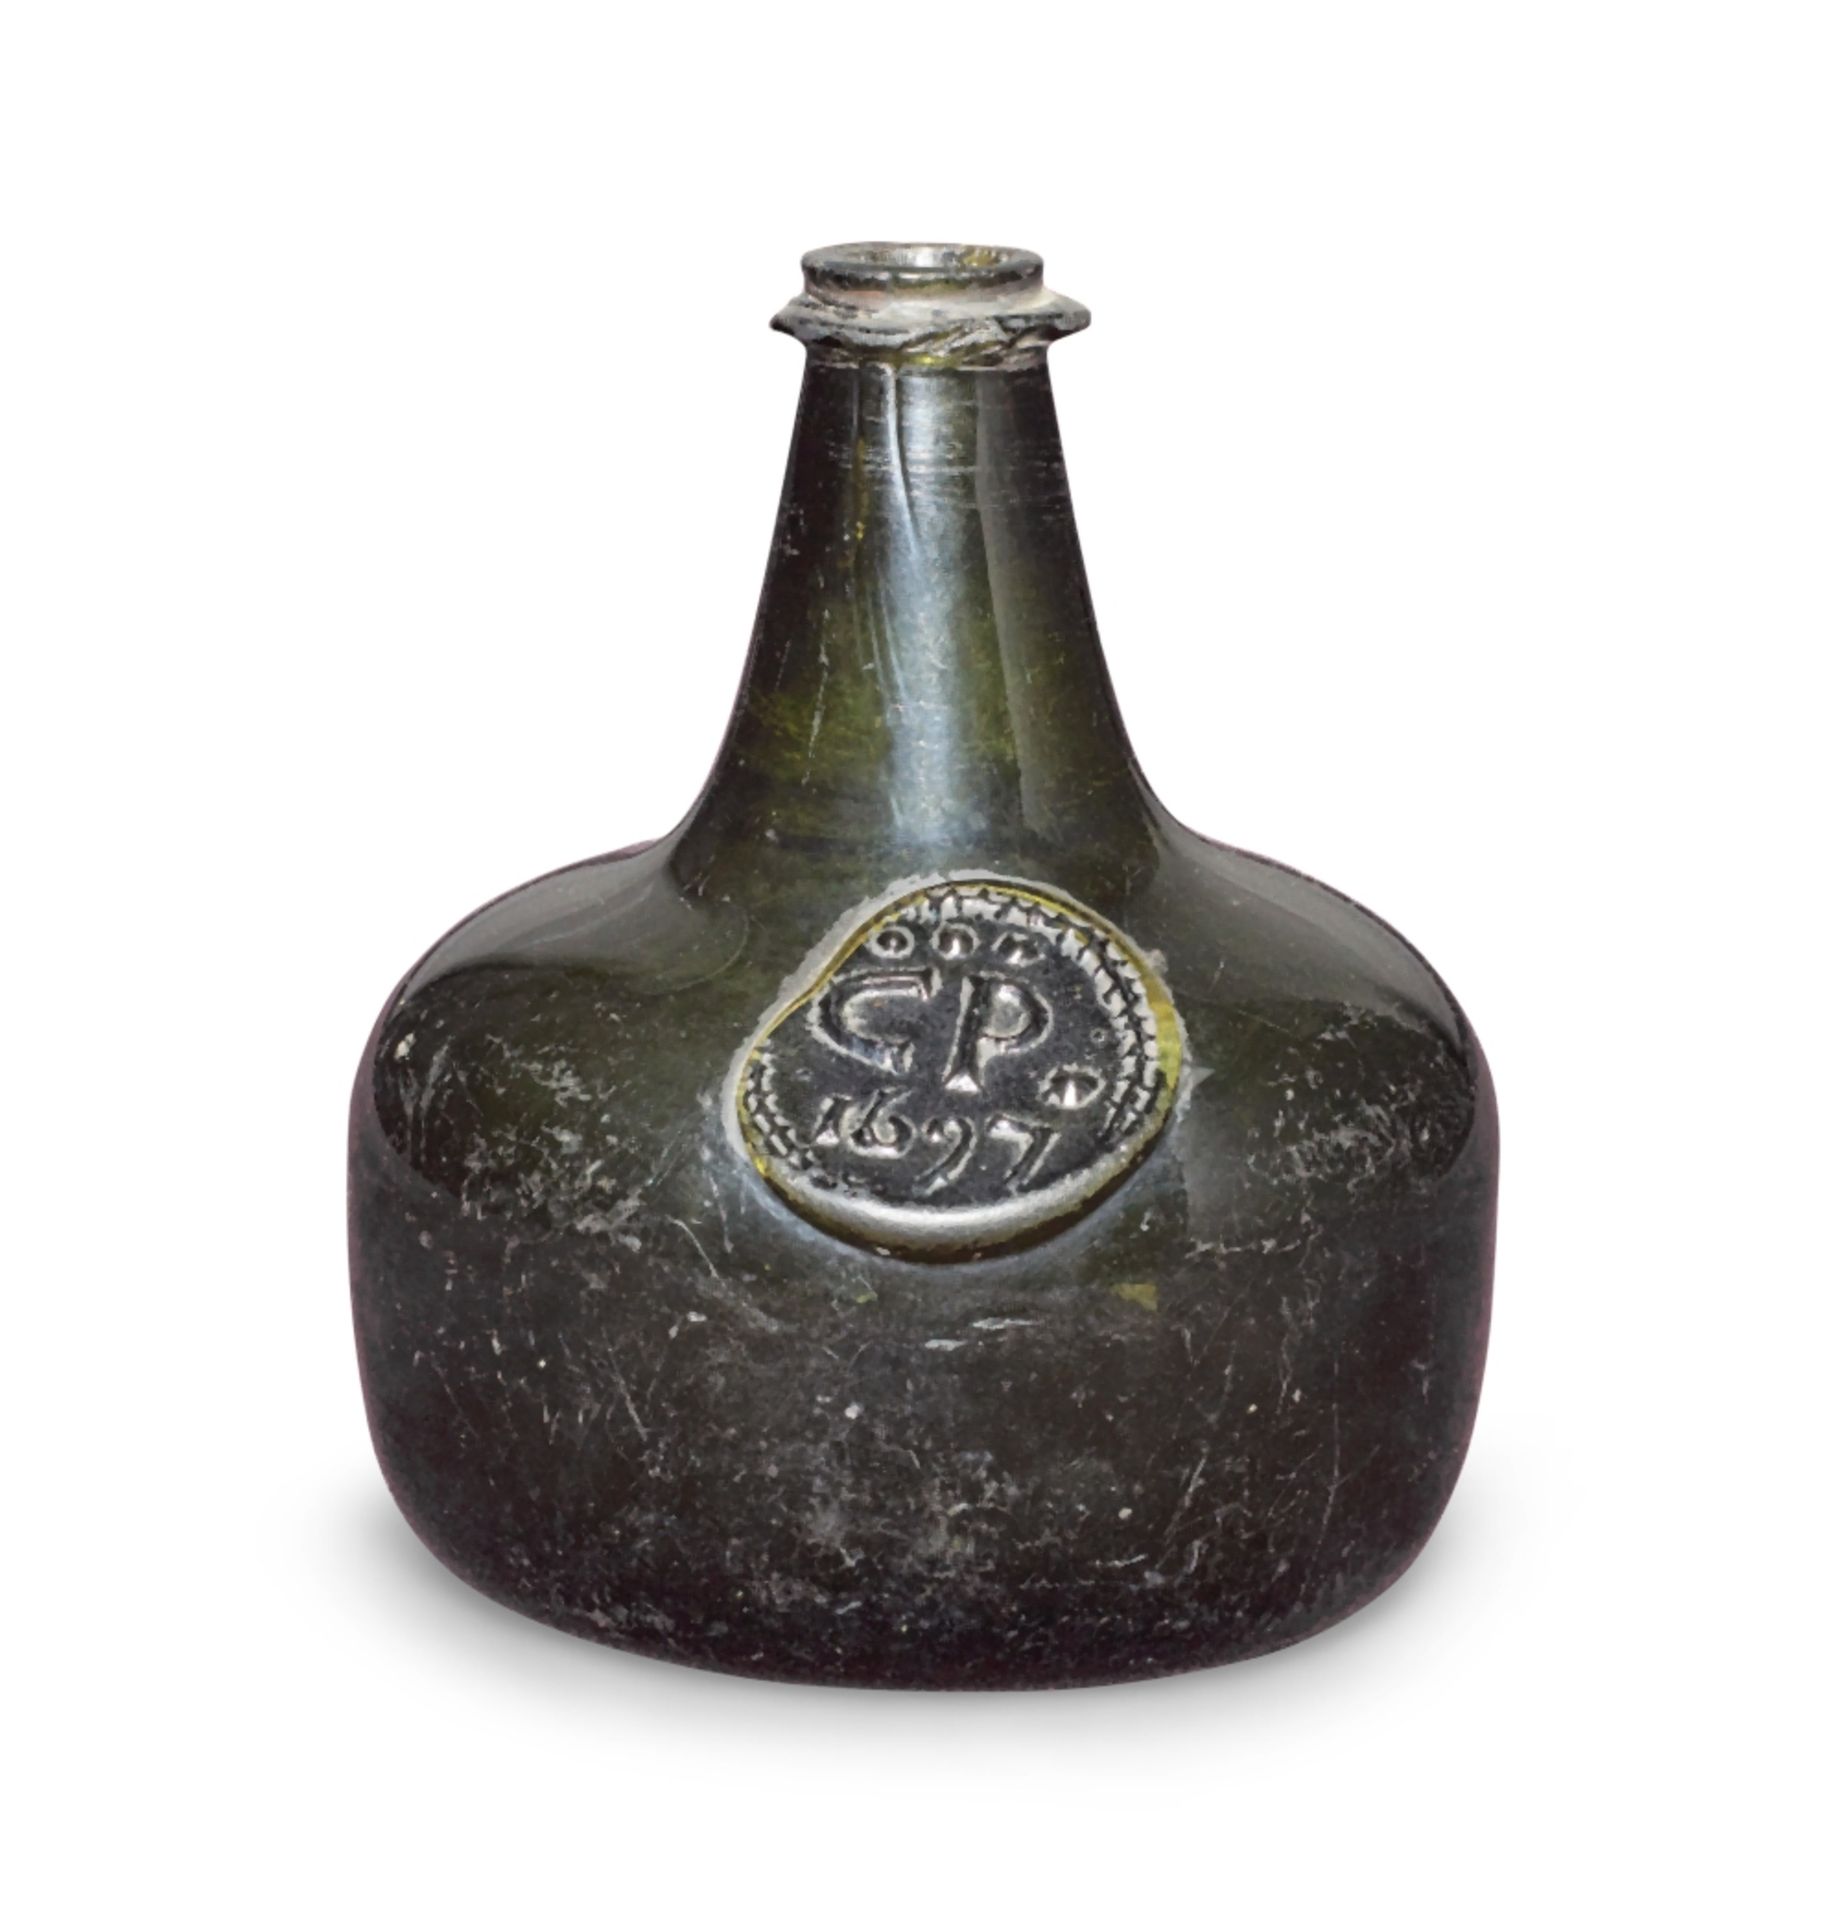 A very rare sealed half size 'Onion' wine bottle, dated 1697